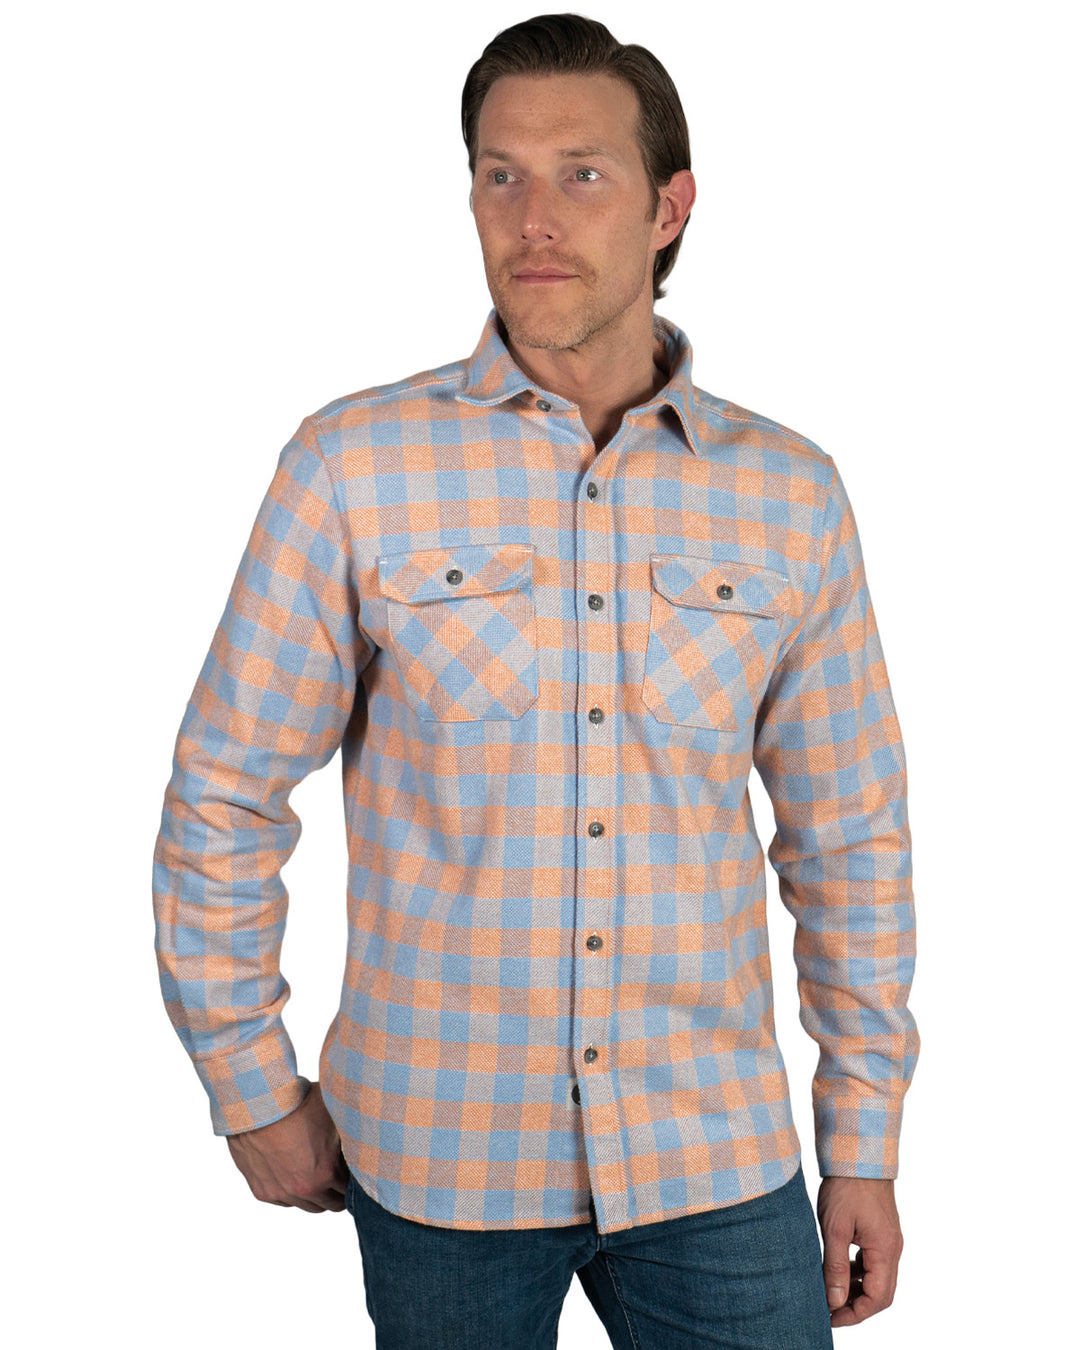 Heavywelght Flannel Shirt for Men by Muskox Flannels, Thick 100% Cotton Flannel Shirt in Orange